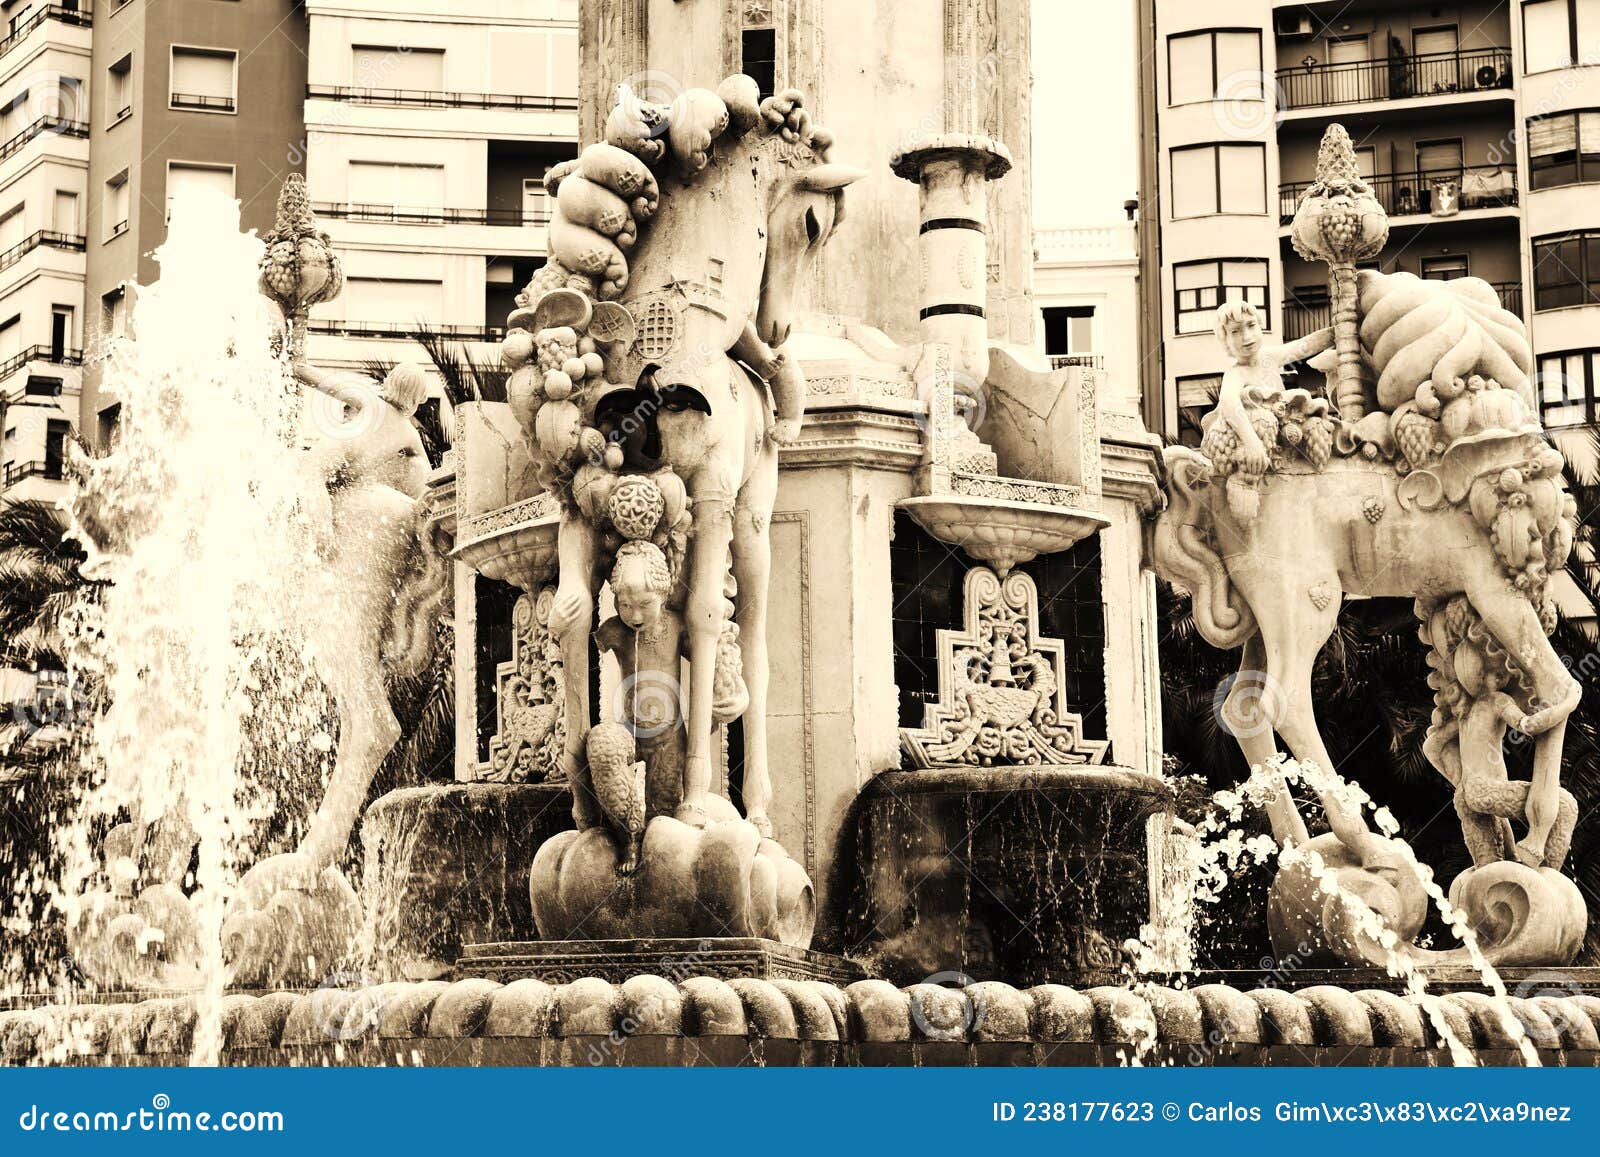 statues of horses in the plaza and fountain of los luceros de alicante